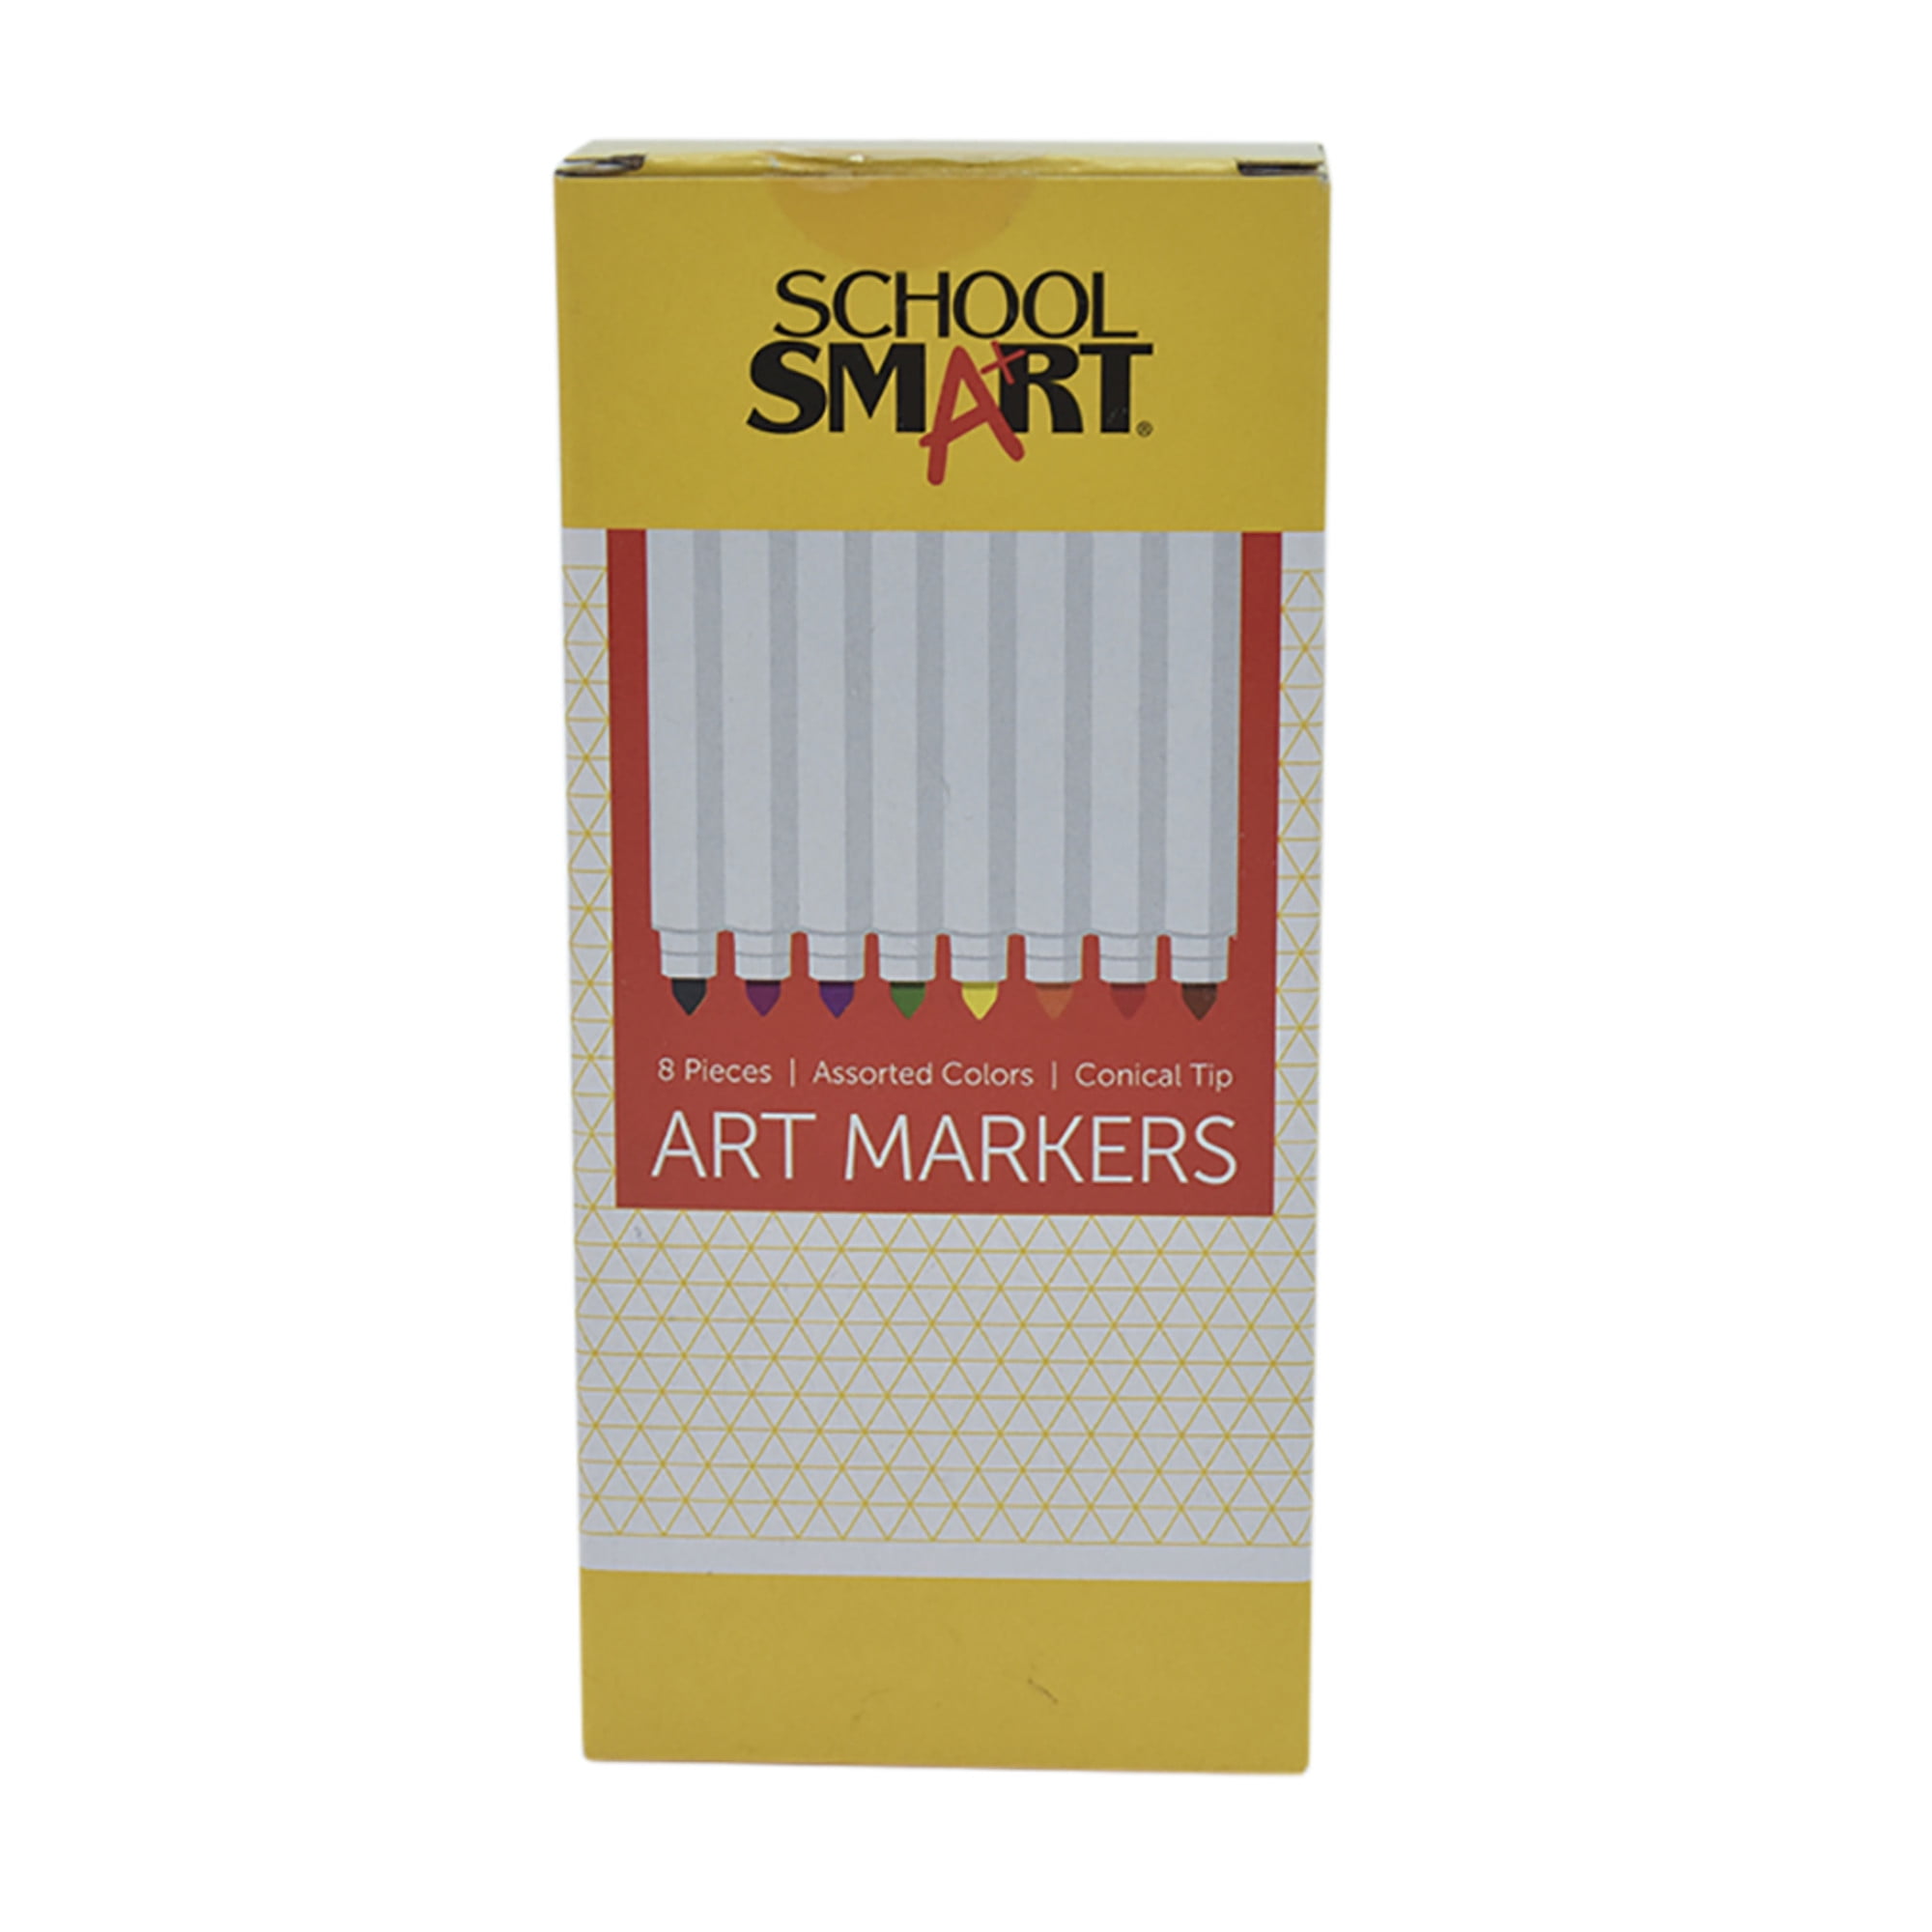 School Smart Washable Art Markers, Conical Tip, Assorted Colors, Set of 64